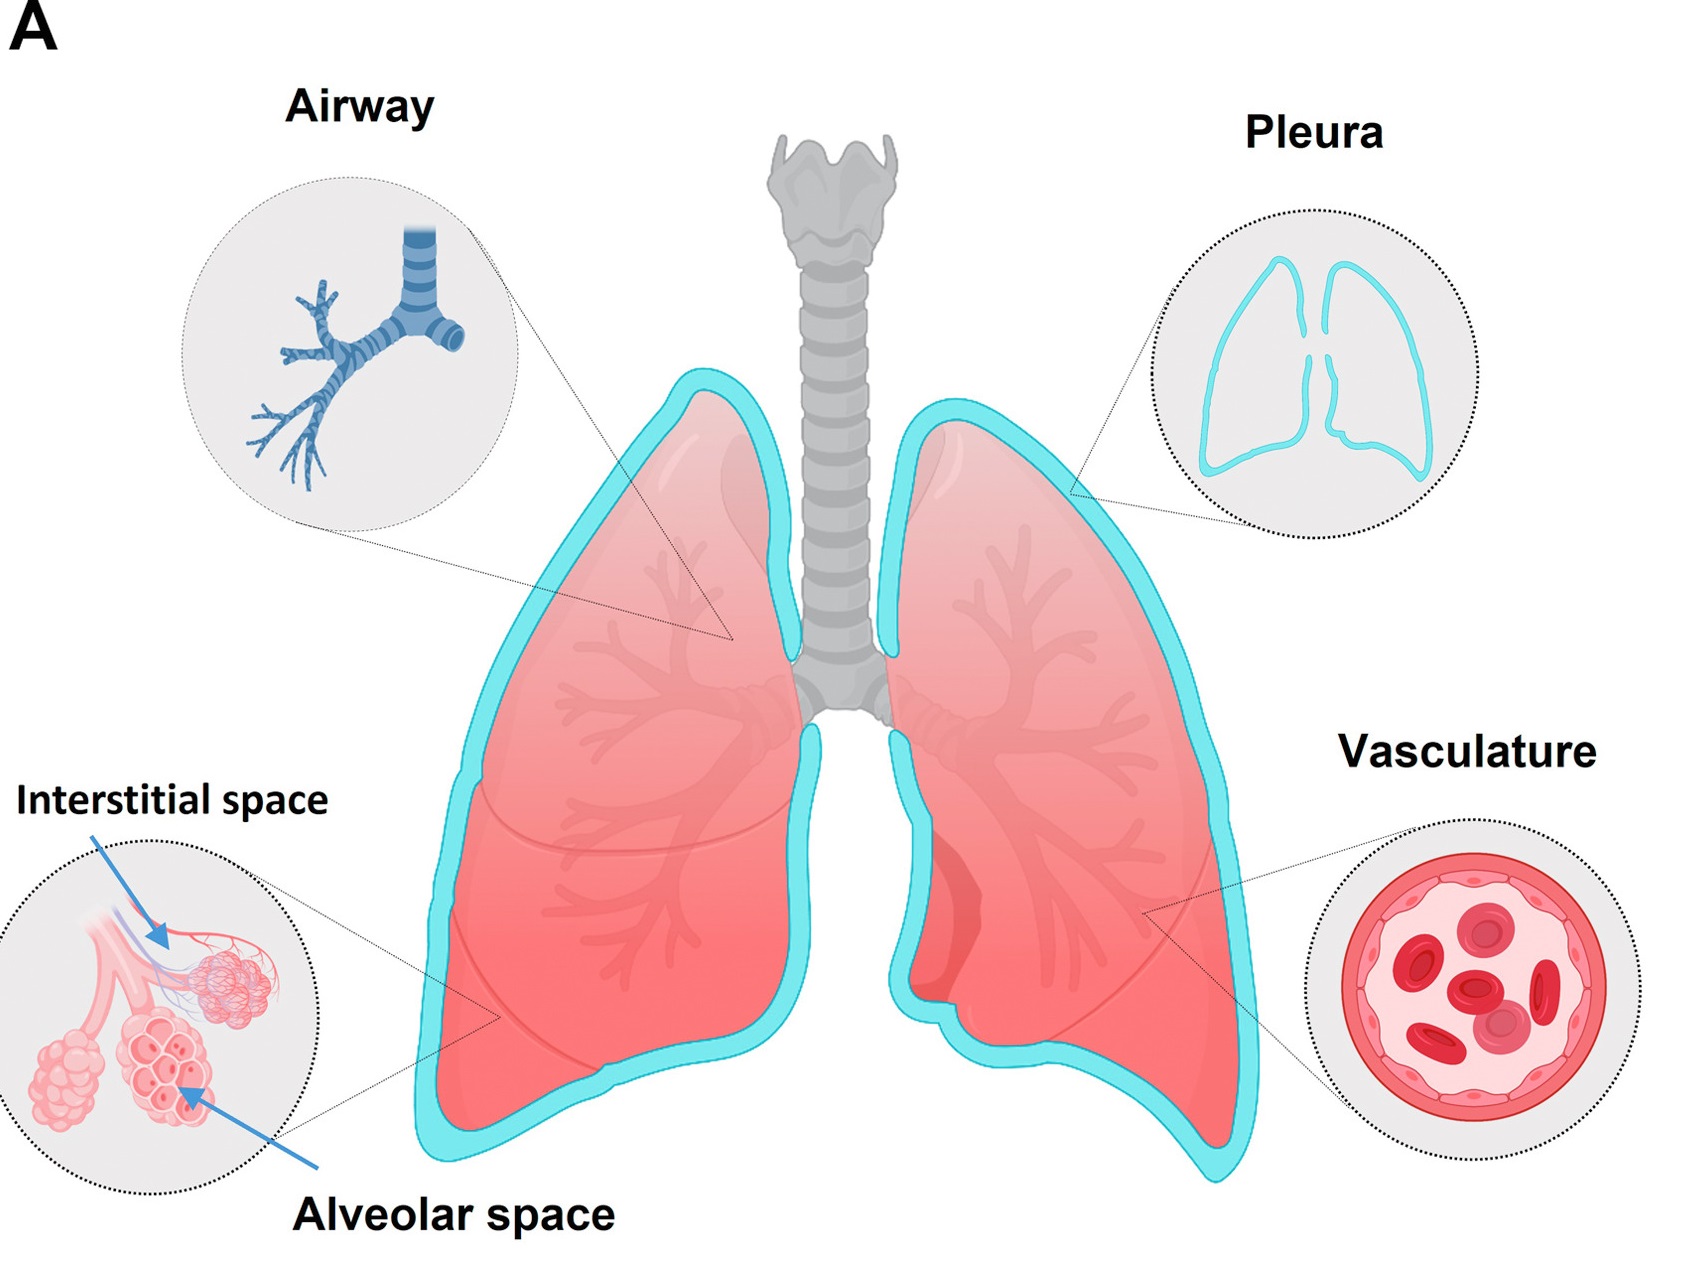 The lung compartments affected by pulmonary manifestations of IEI include the airways, alveolar space, interstitial space, vasculature, and the pleural space